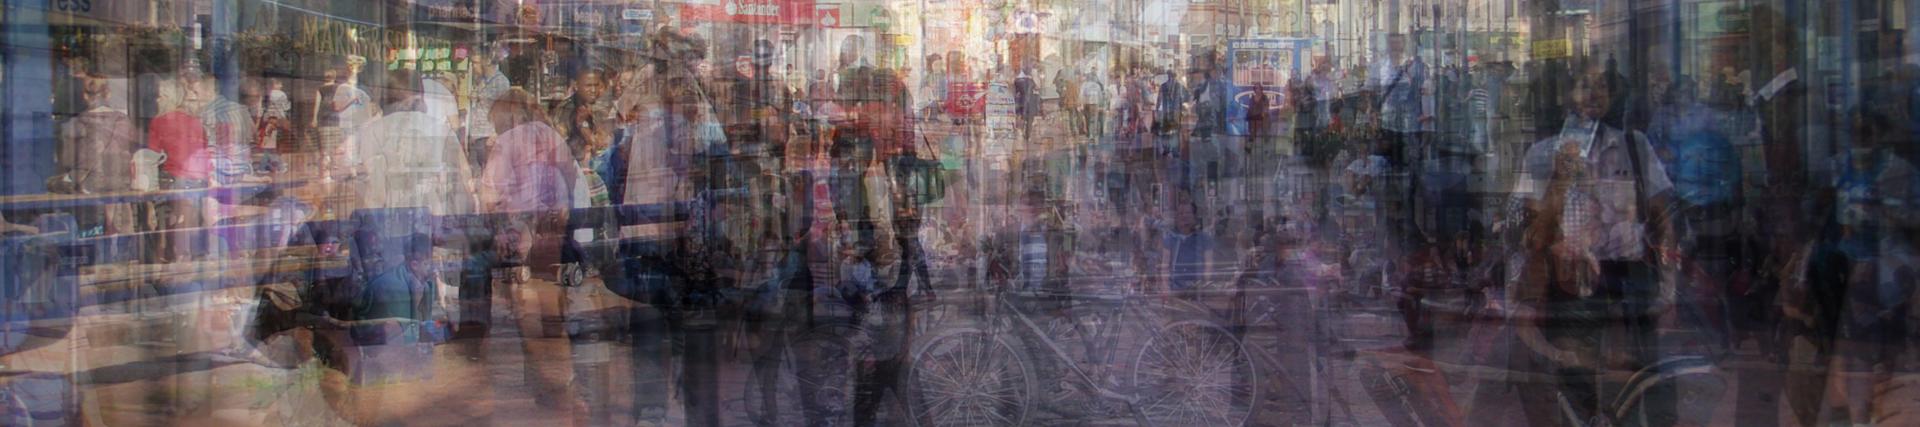 Arty abstract image of busy high street